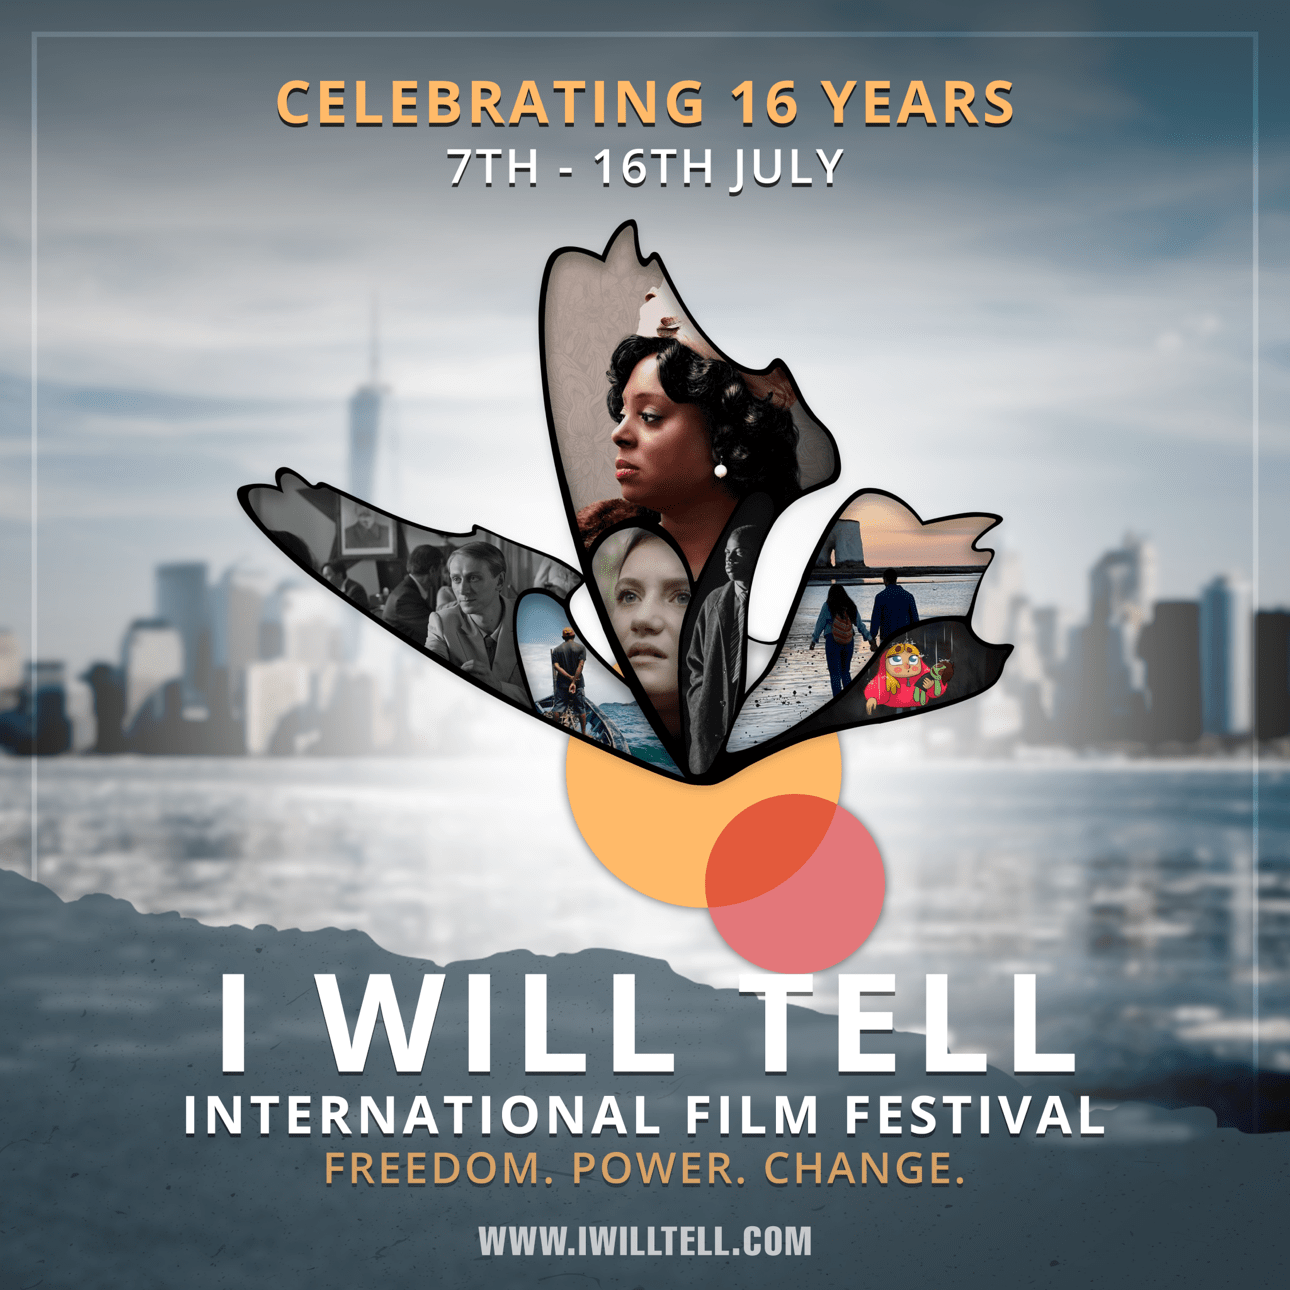 I Will Tell International Film Festival set to open at BFI Southbank with globally inclusive 2022 film lineup